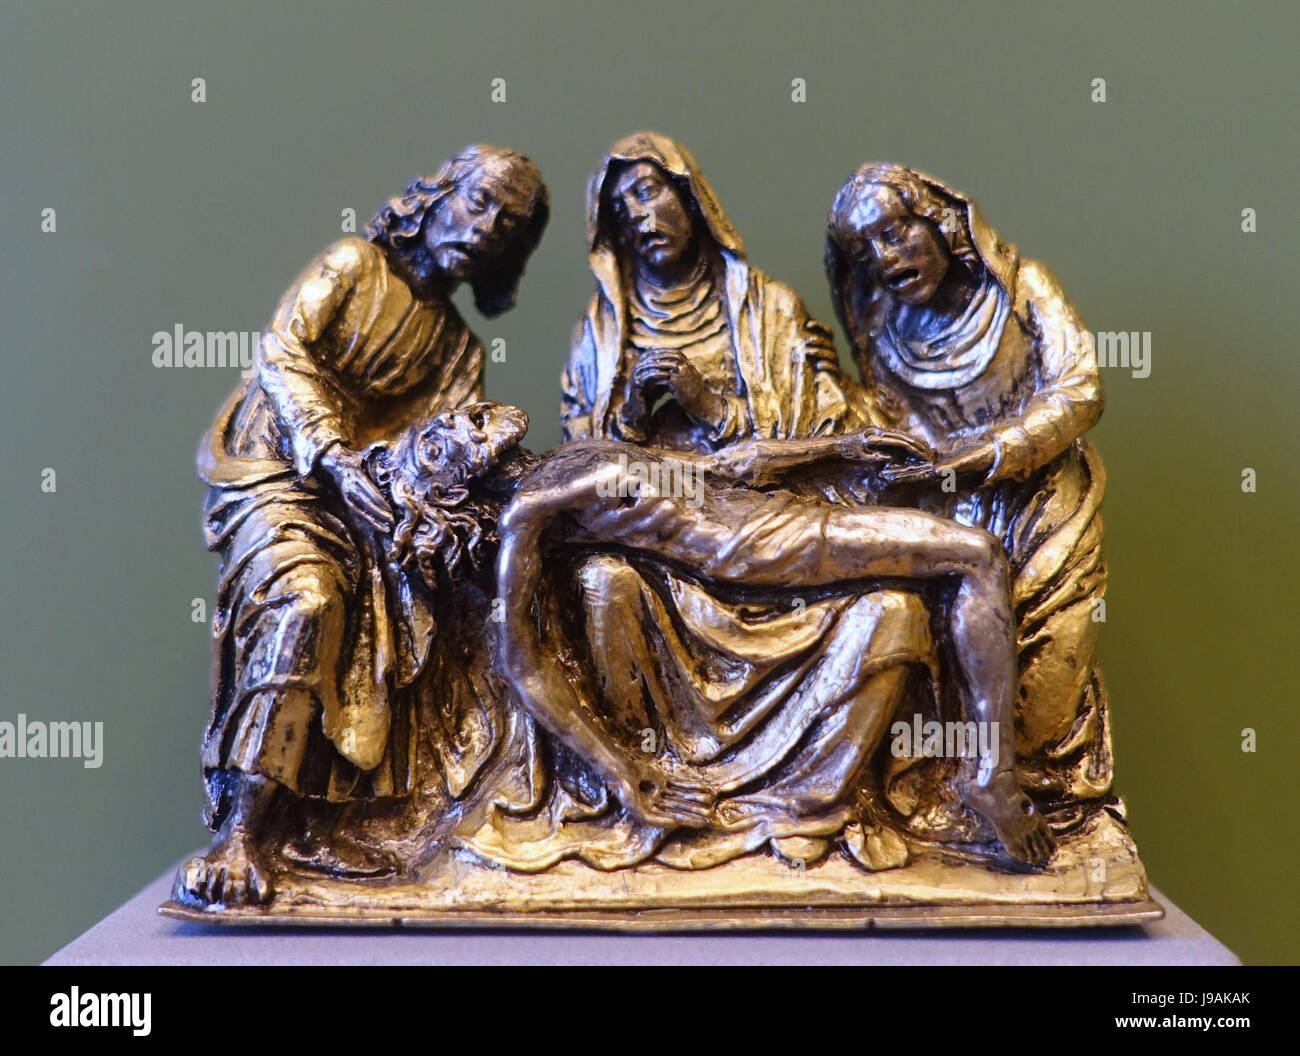 The Lamentation of Christ, Northern Italy, late 15th century, silver, gilding   Bode Museum  DSC02441 Stock Photo